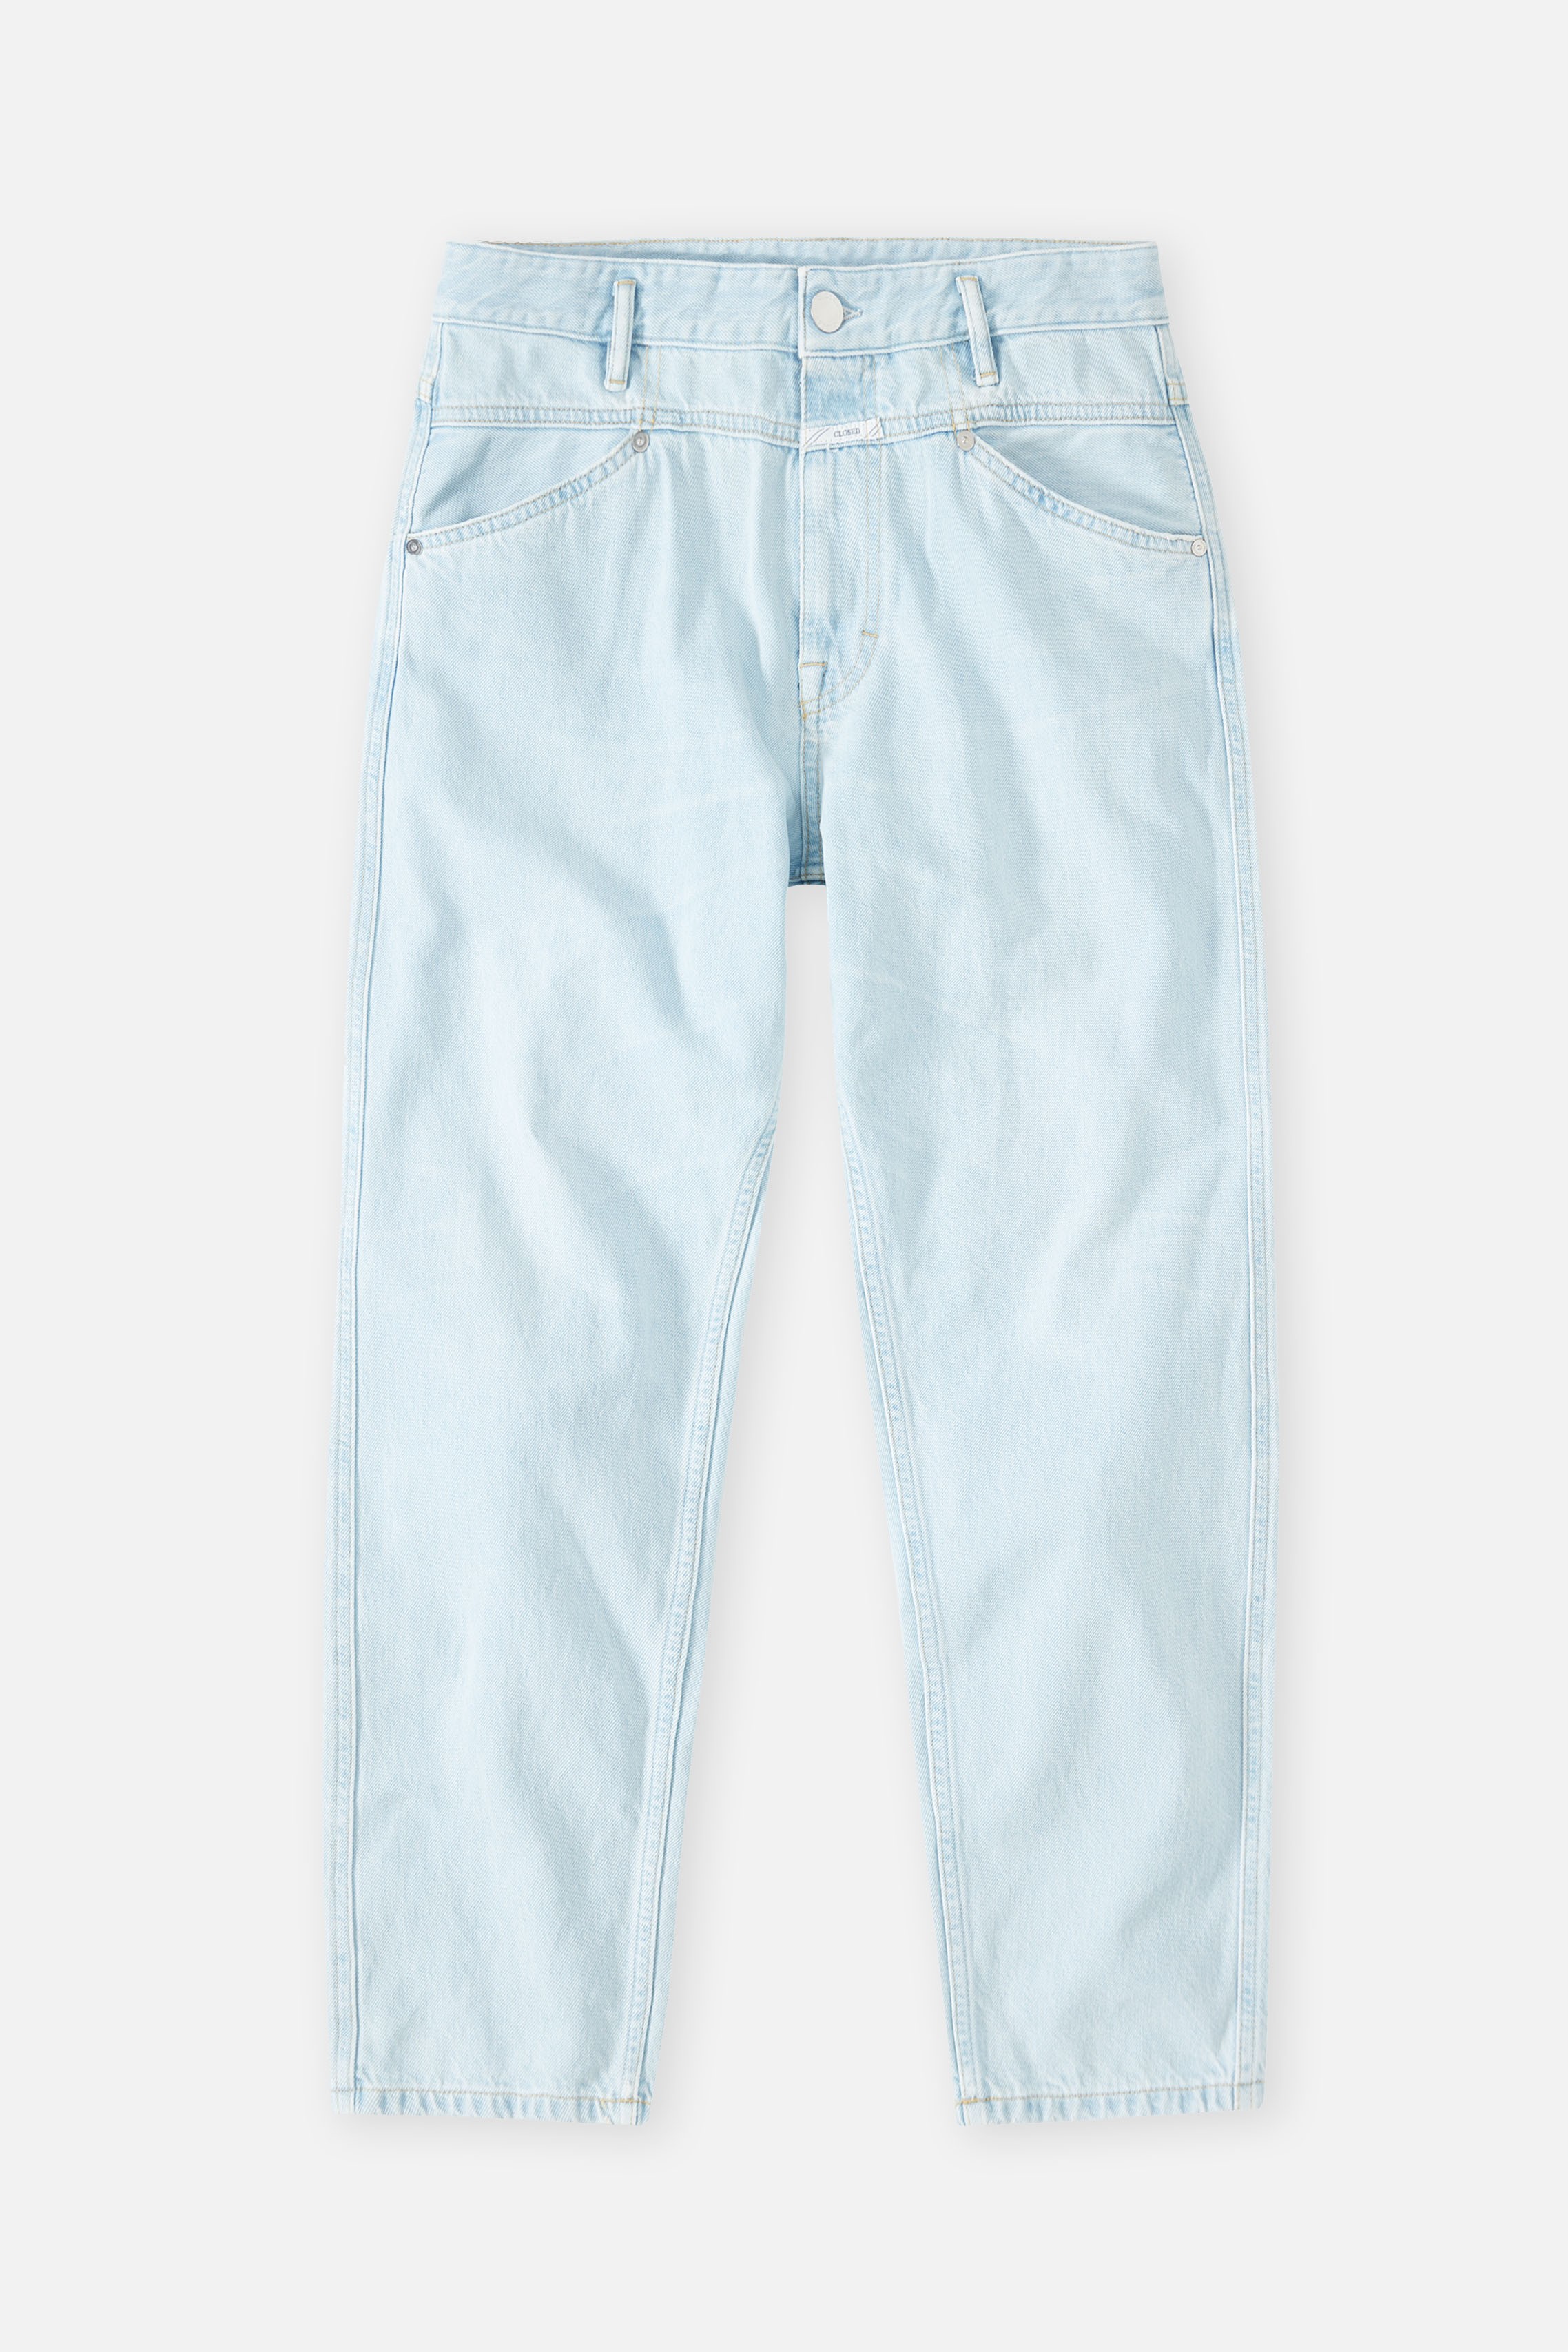 closed-jean-x-lent-tapered-light-blue